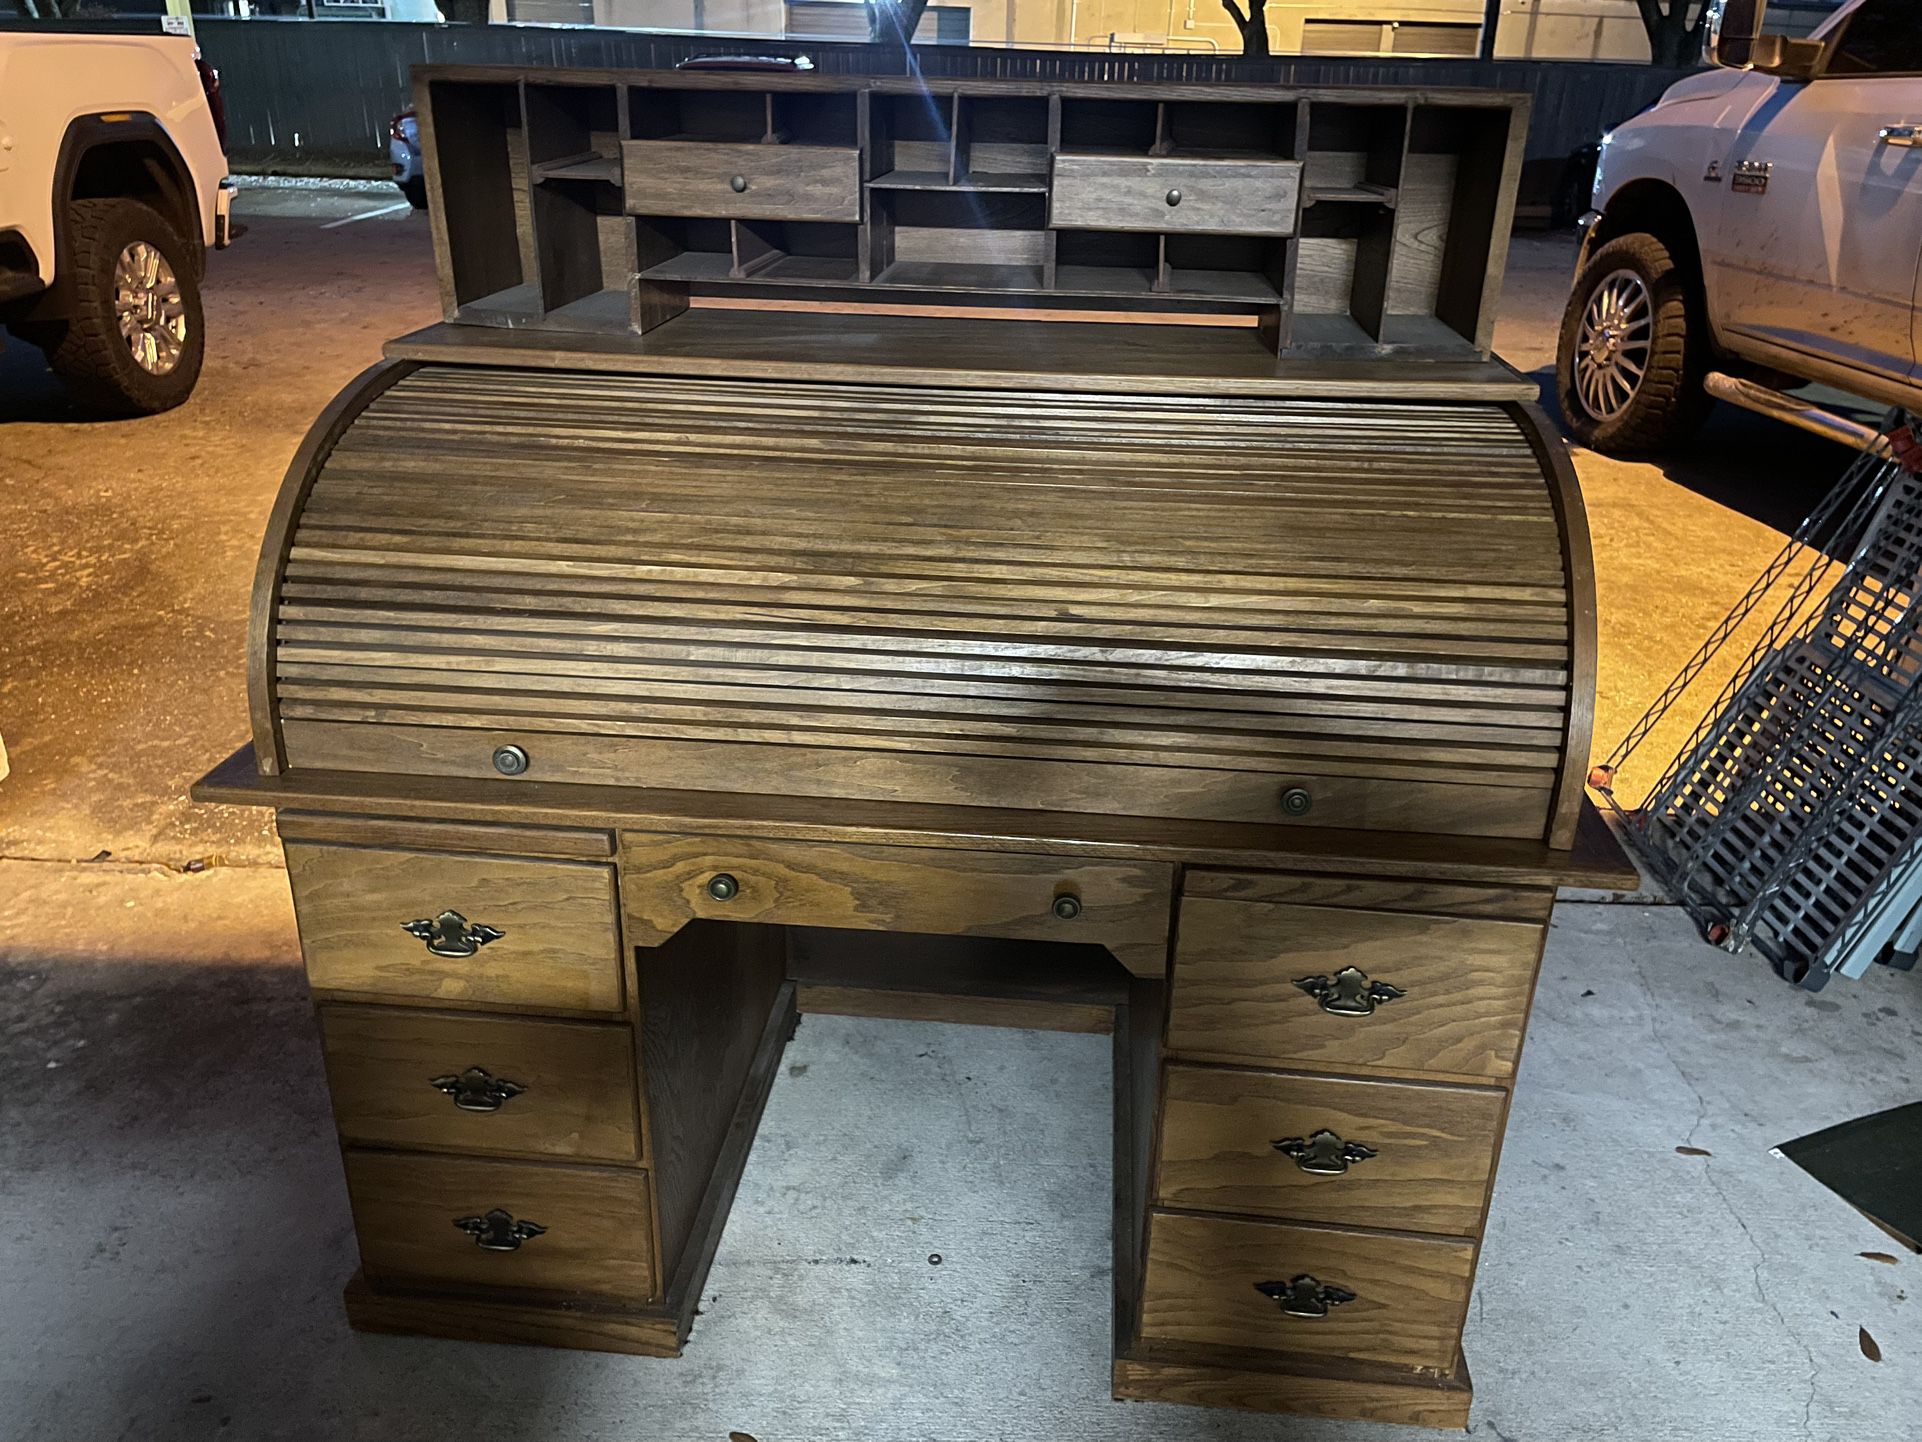  Vintage Wooden Salesman Sample Oak Roll Top Rolltop Desk 12 x 12 x 6. Great condition.  One spot of missing varnish on roll top part as pictured and 